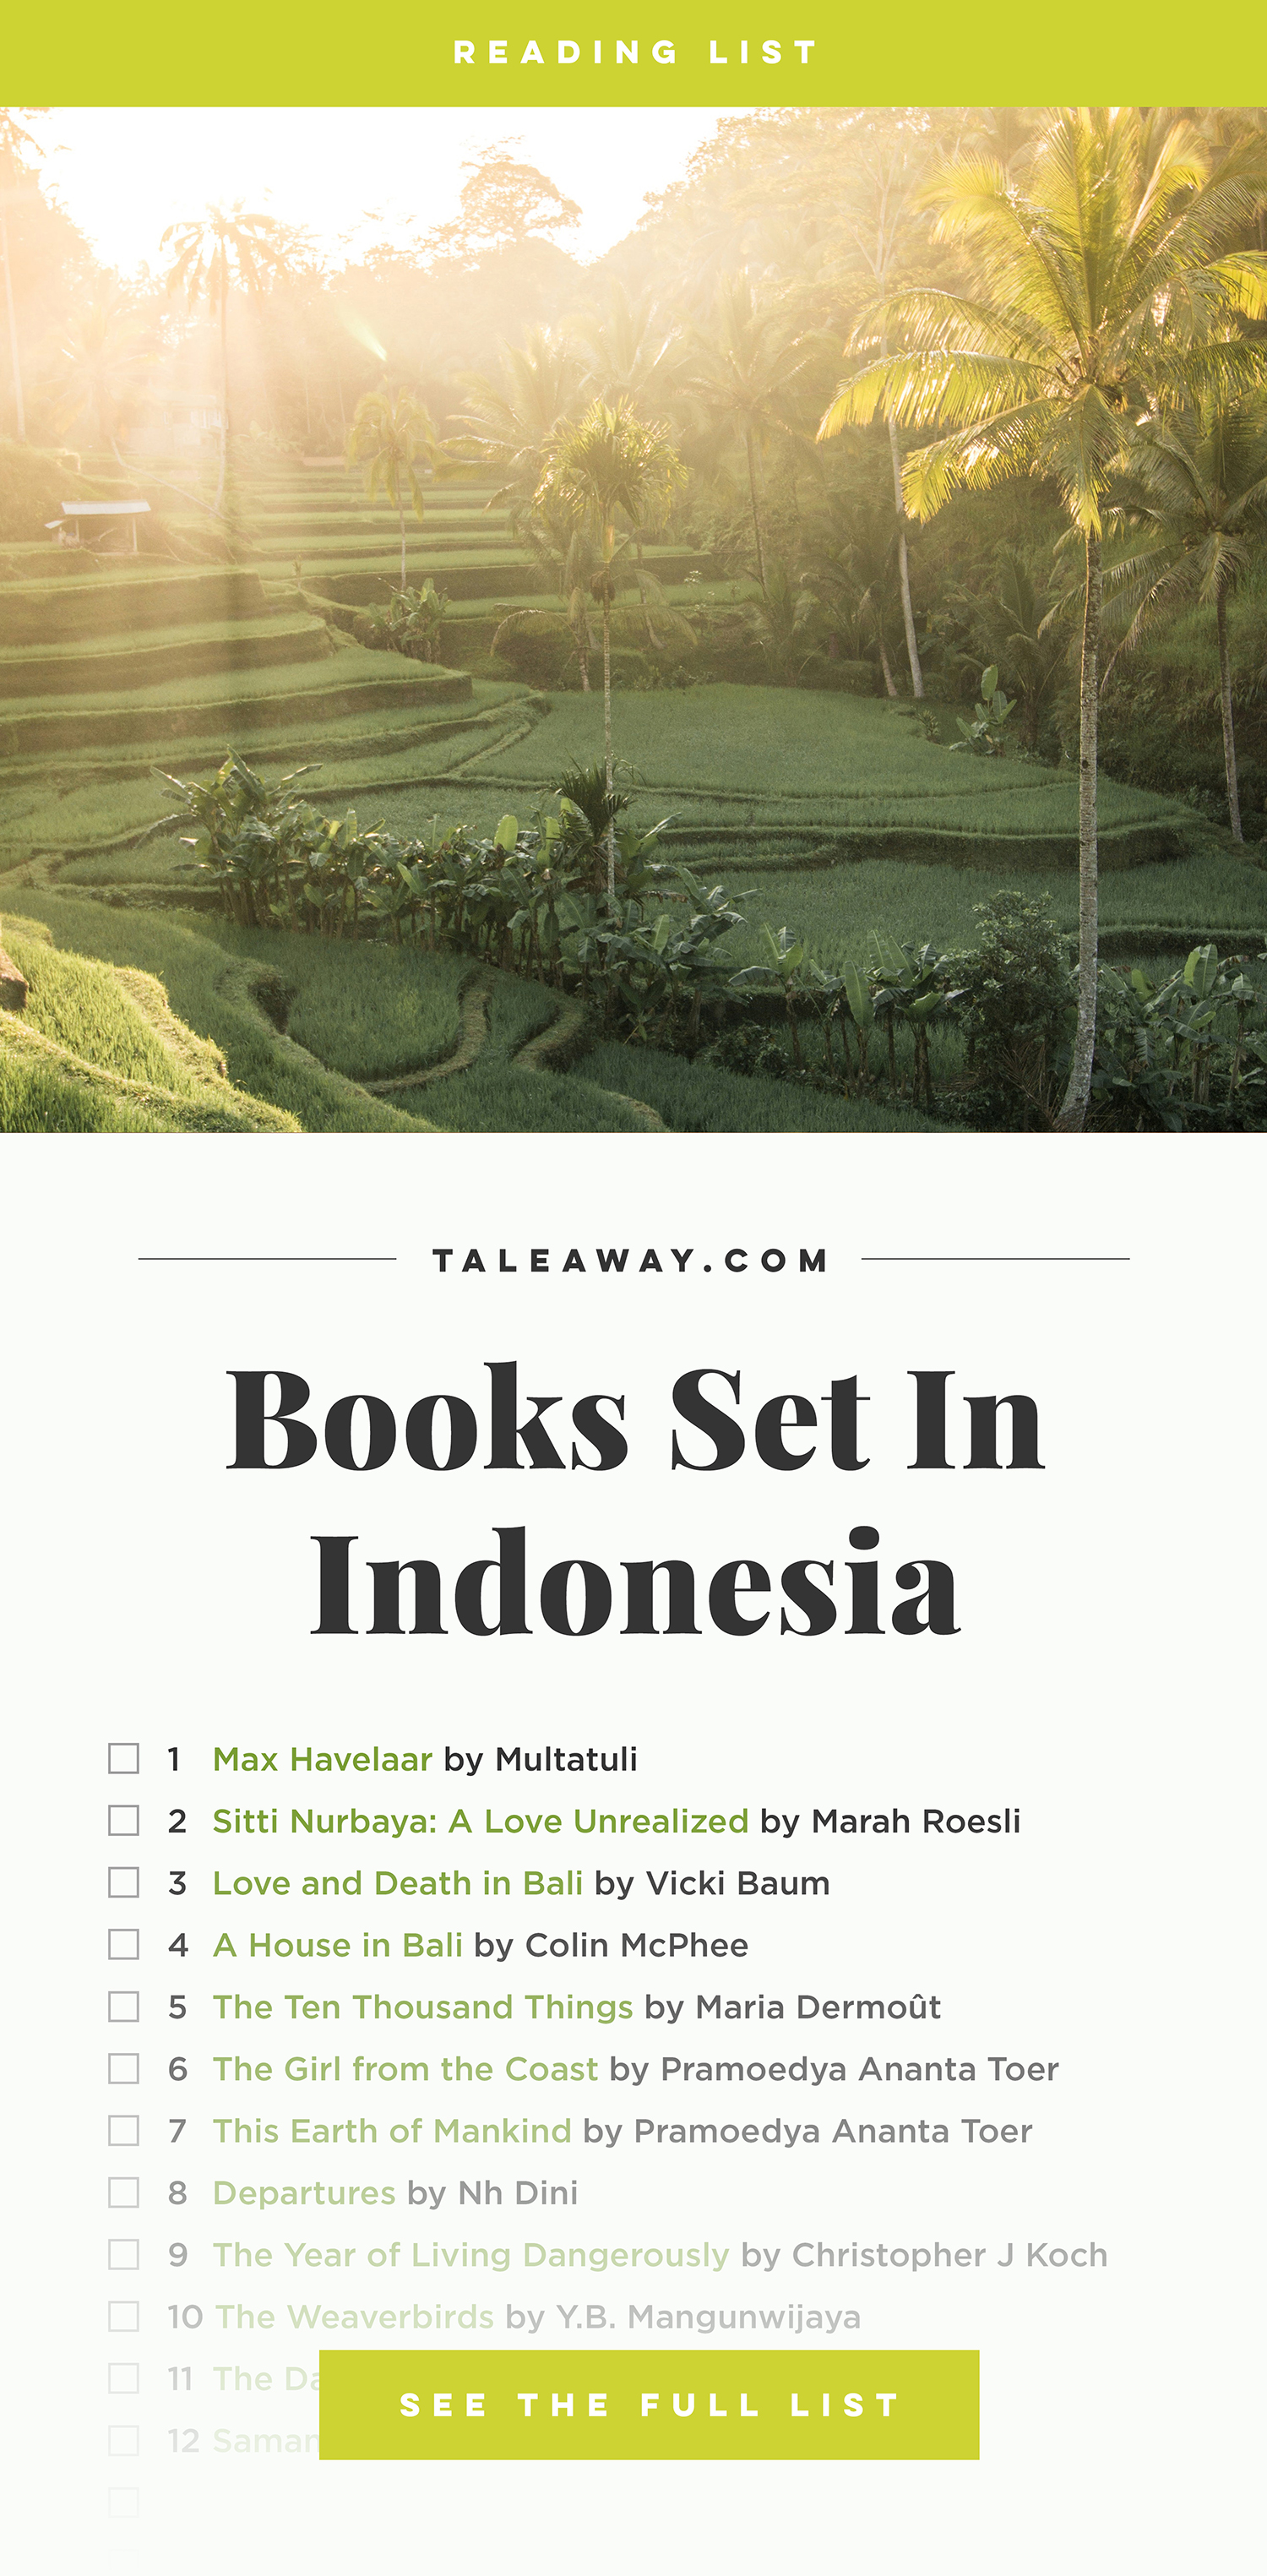 Books Set In Indonesia. Visit www.taleway.com to find books from around the world. books indonesia, books about indonesia, indonesia inspiration, indonesia travel, indonesia reading, indonesia reading challenge, indonesia packing, novel indonesia, indonesia trip, bali book, bali inspiration, bali travel, travel reading challenge, ubud travel, gili travel, books set in asia, books and travel, indonesia book novel, indonesia book challenge, indonesia bucket list, indonesia backpacking, indonesian culture, indonesia guide, indonesia quotes, reading list, books around the world, books to read, books set in different countries